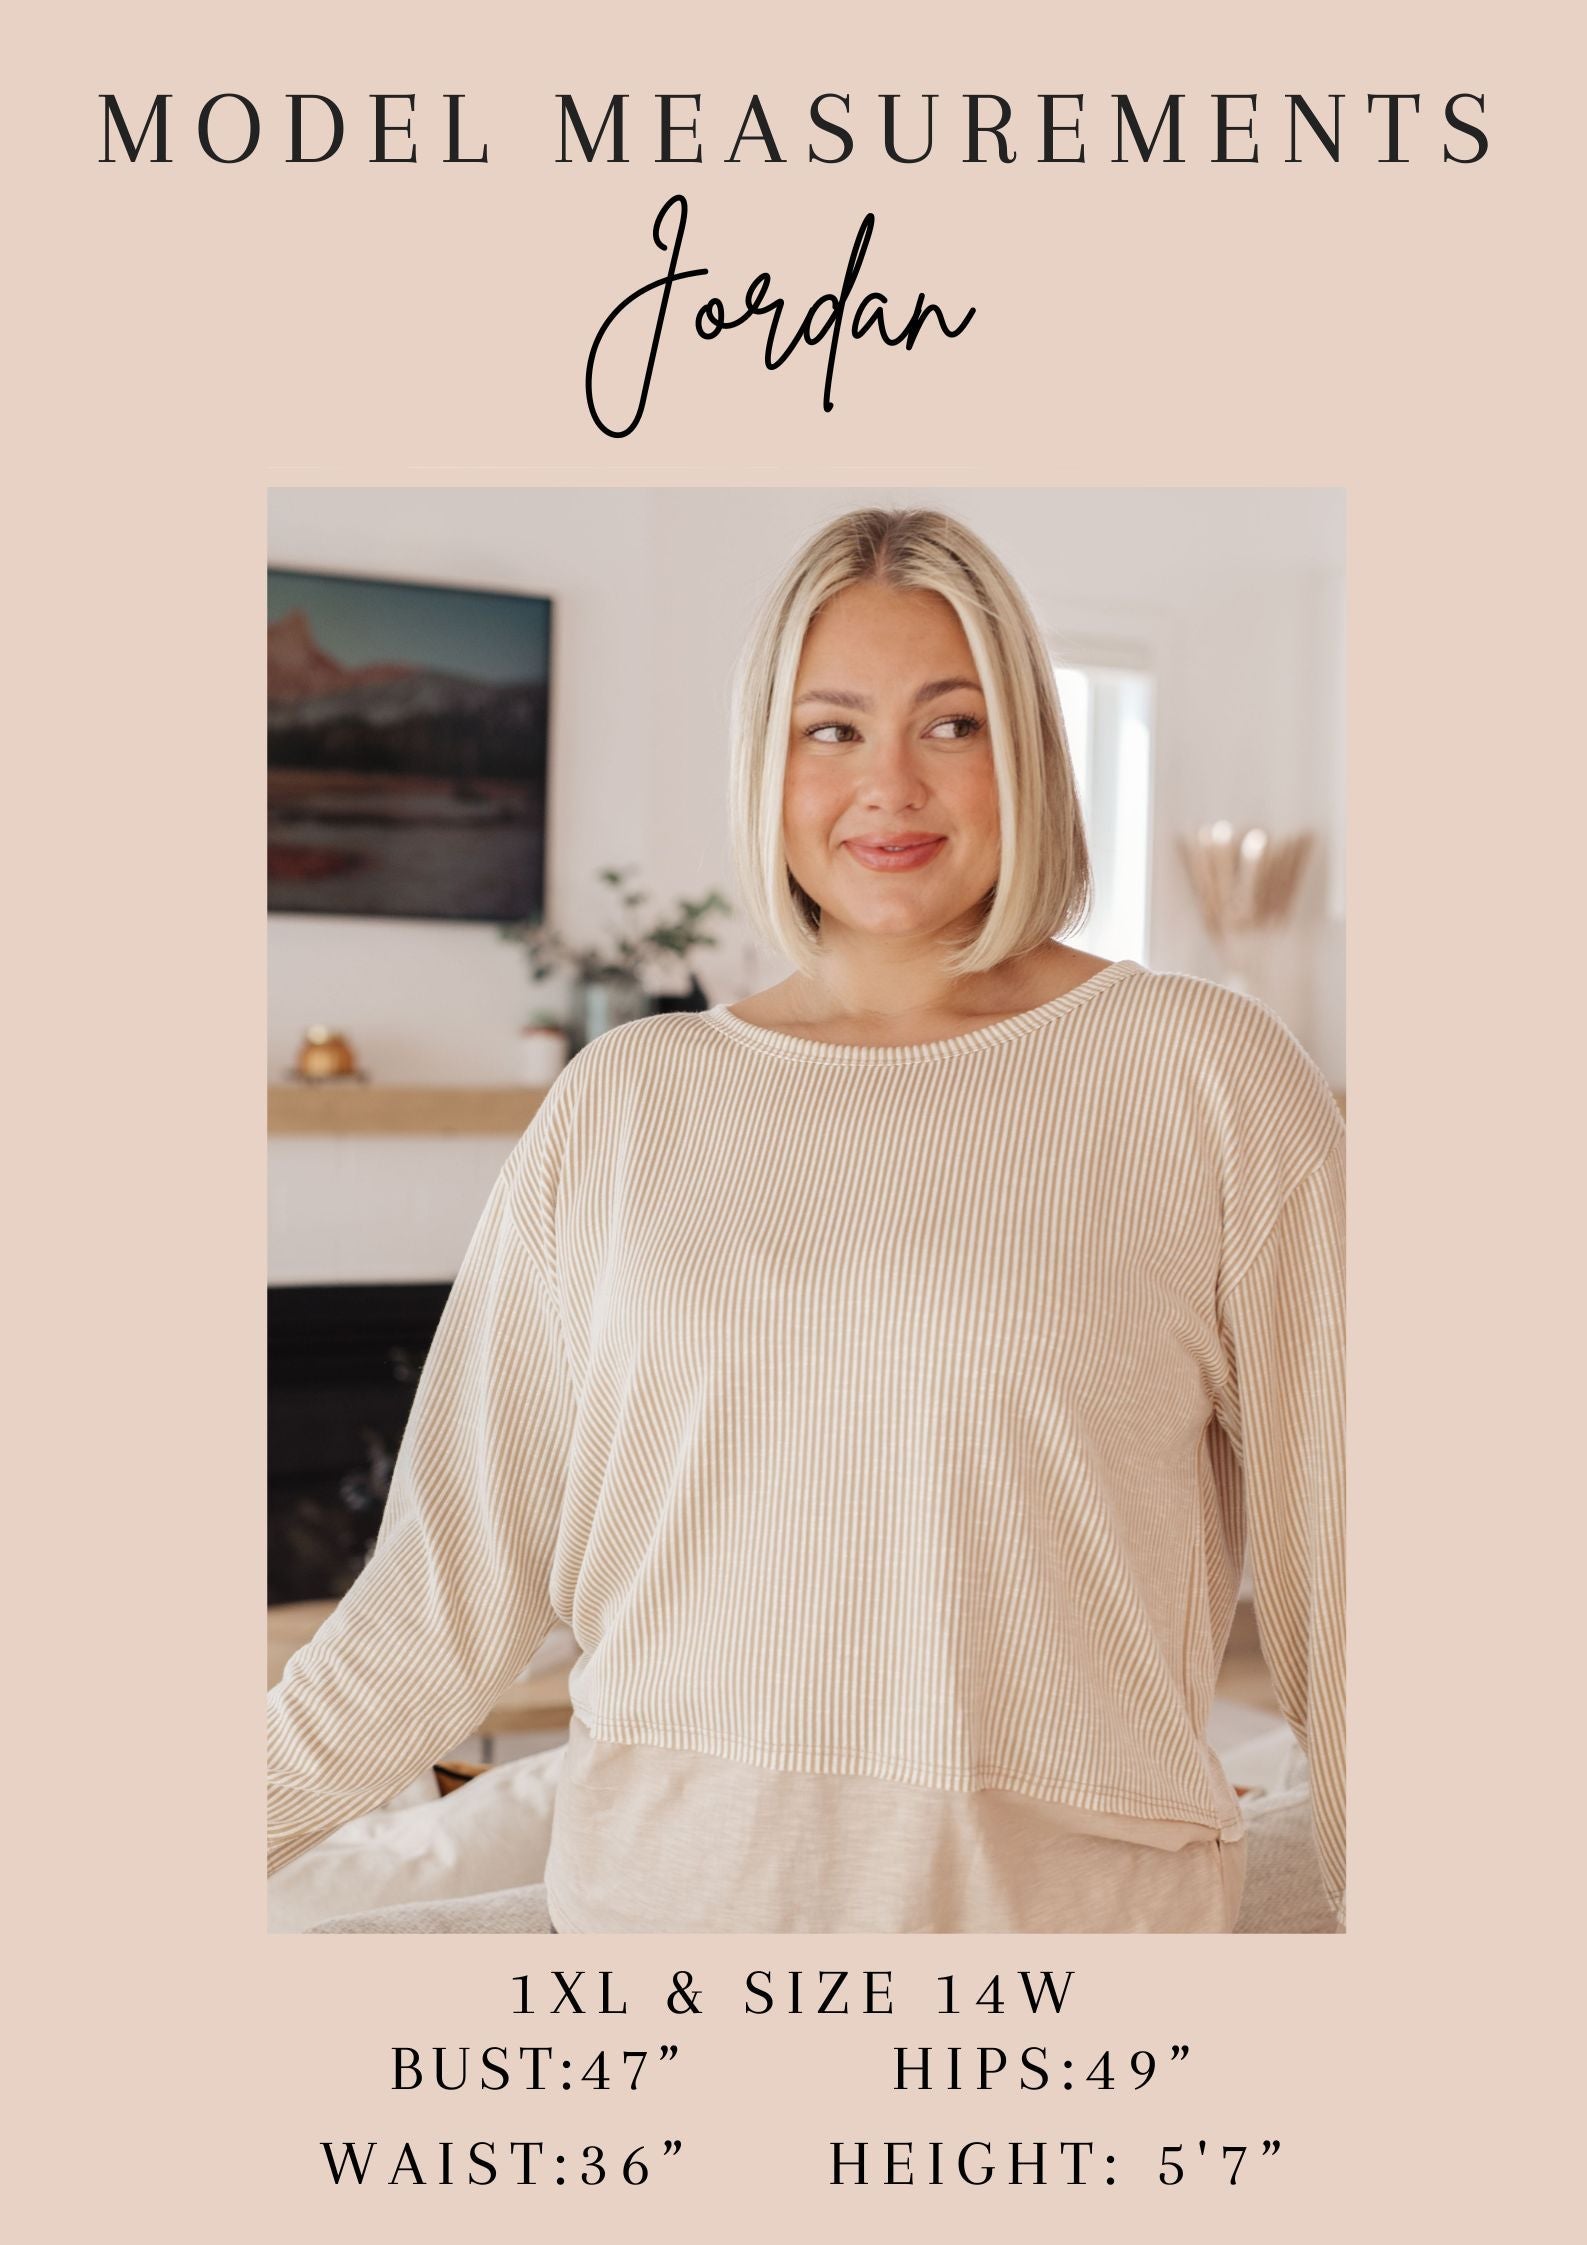 This Calming Down Loose Knit Top offers lightweight comfort. Its sheer layer and relaxed fit will keep you relaxed and comfy all day long! Perfect for when you need to take it easy. S-3X